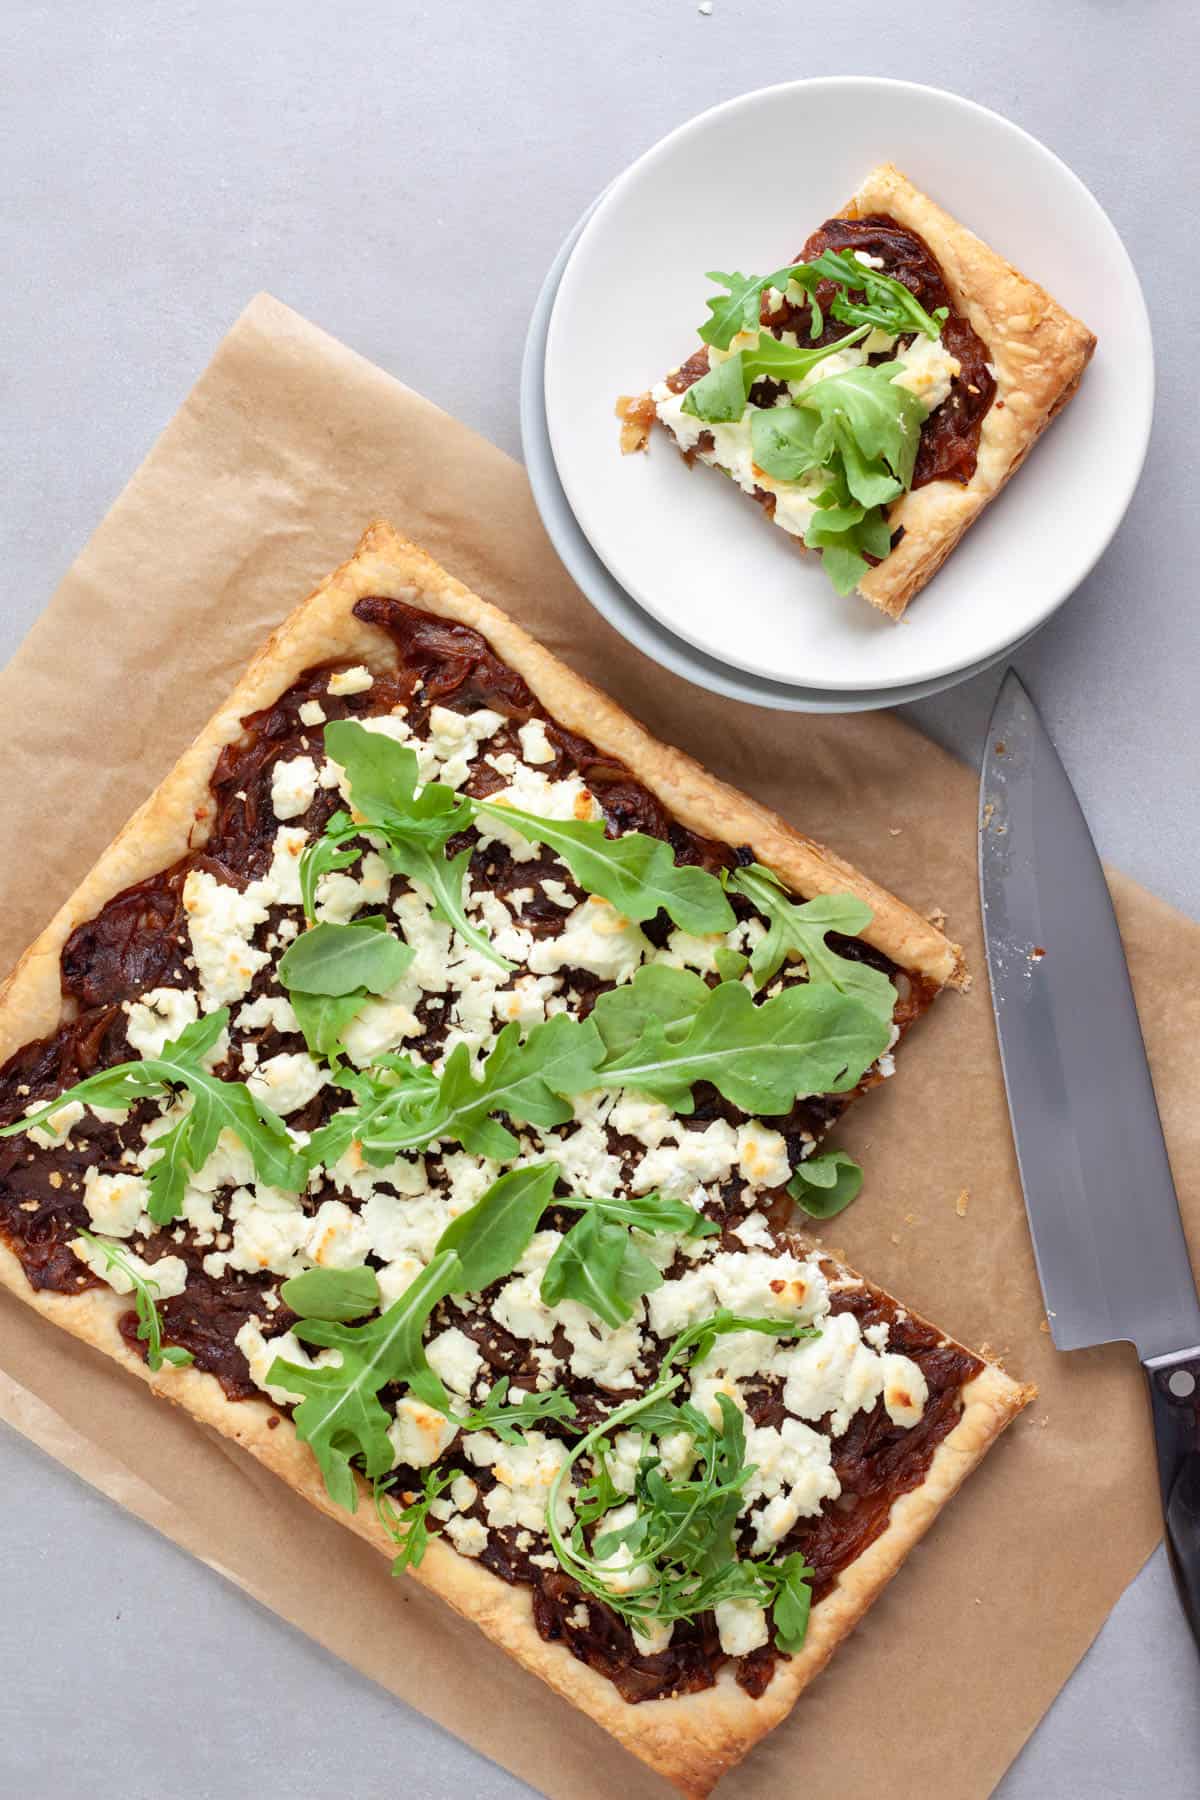 A portion of caramelized onion and goat cheese tart cut out of a larger tart and placed on a small plate.